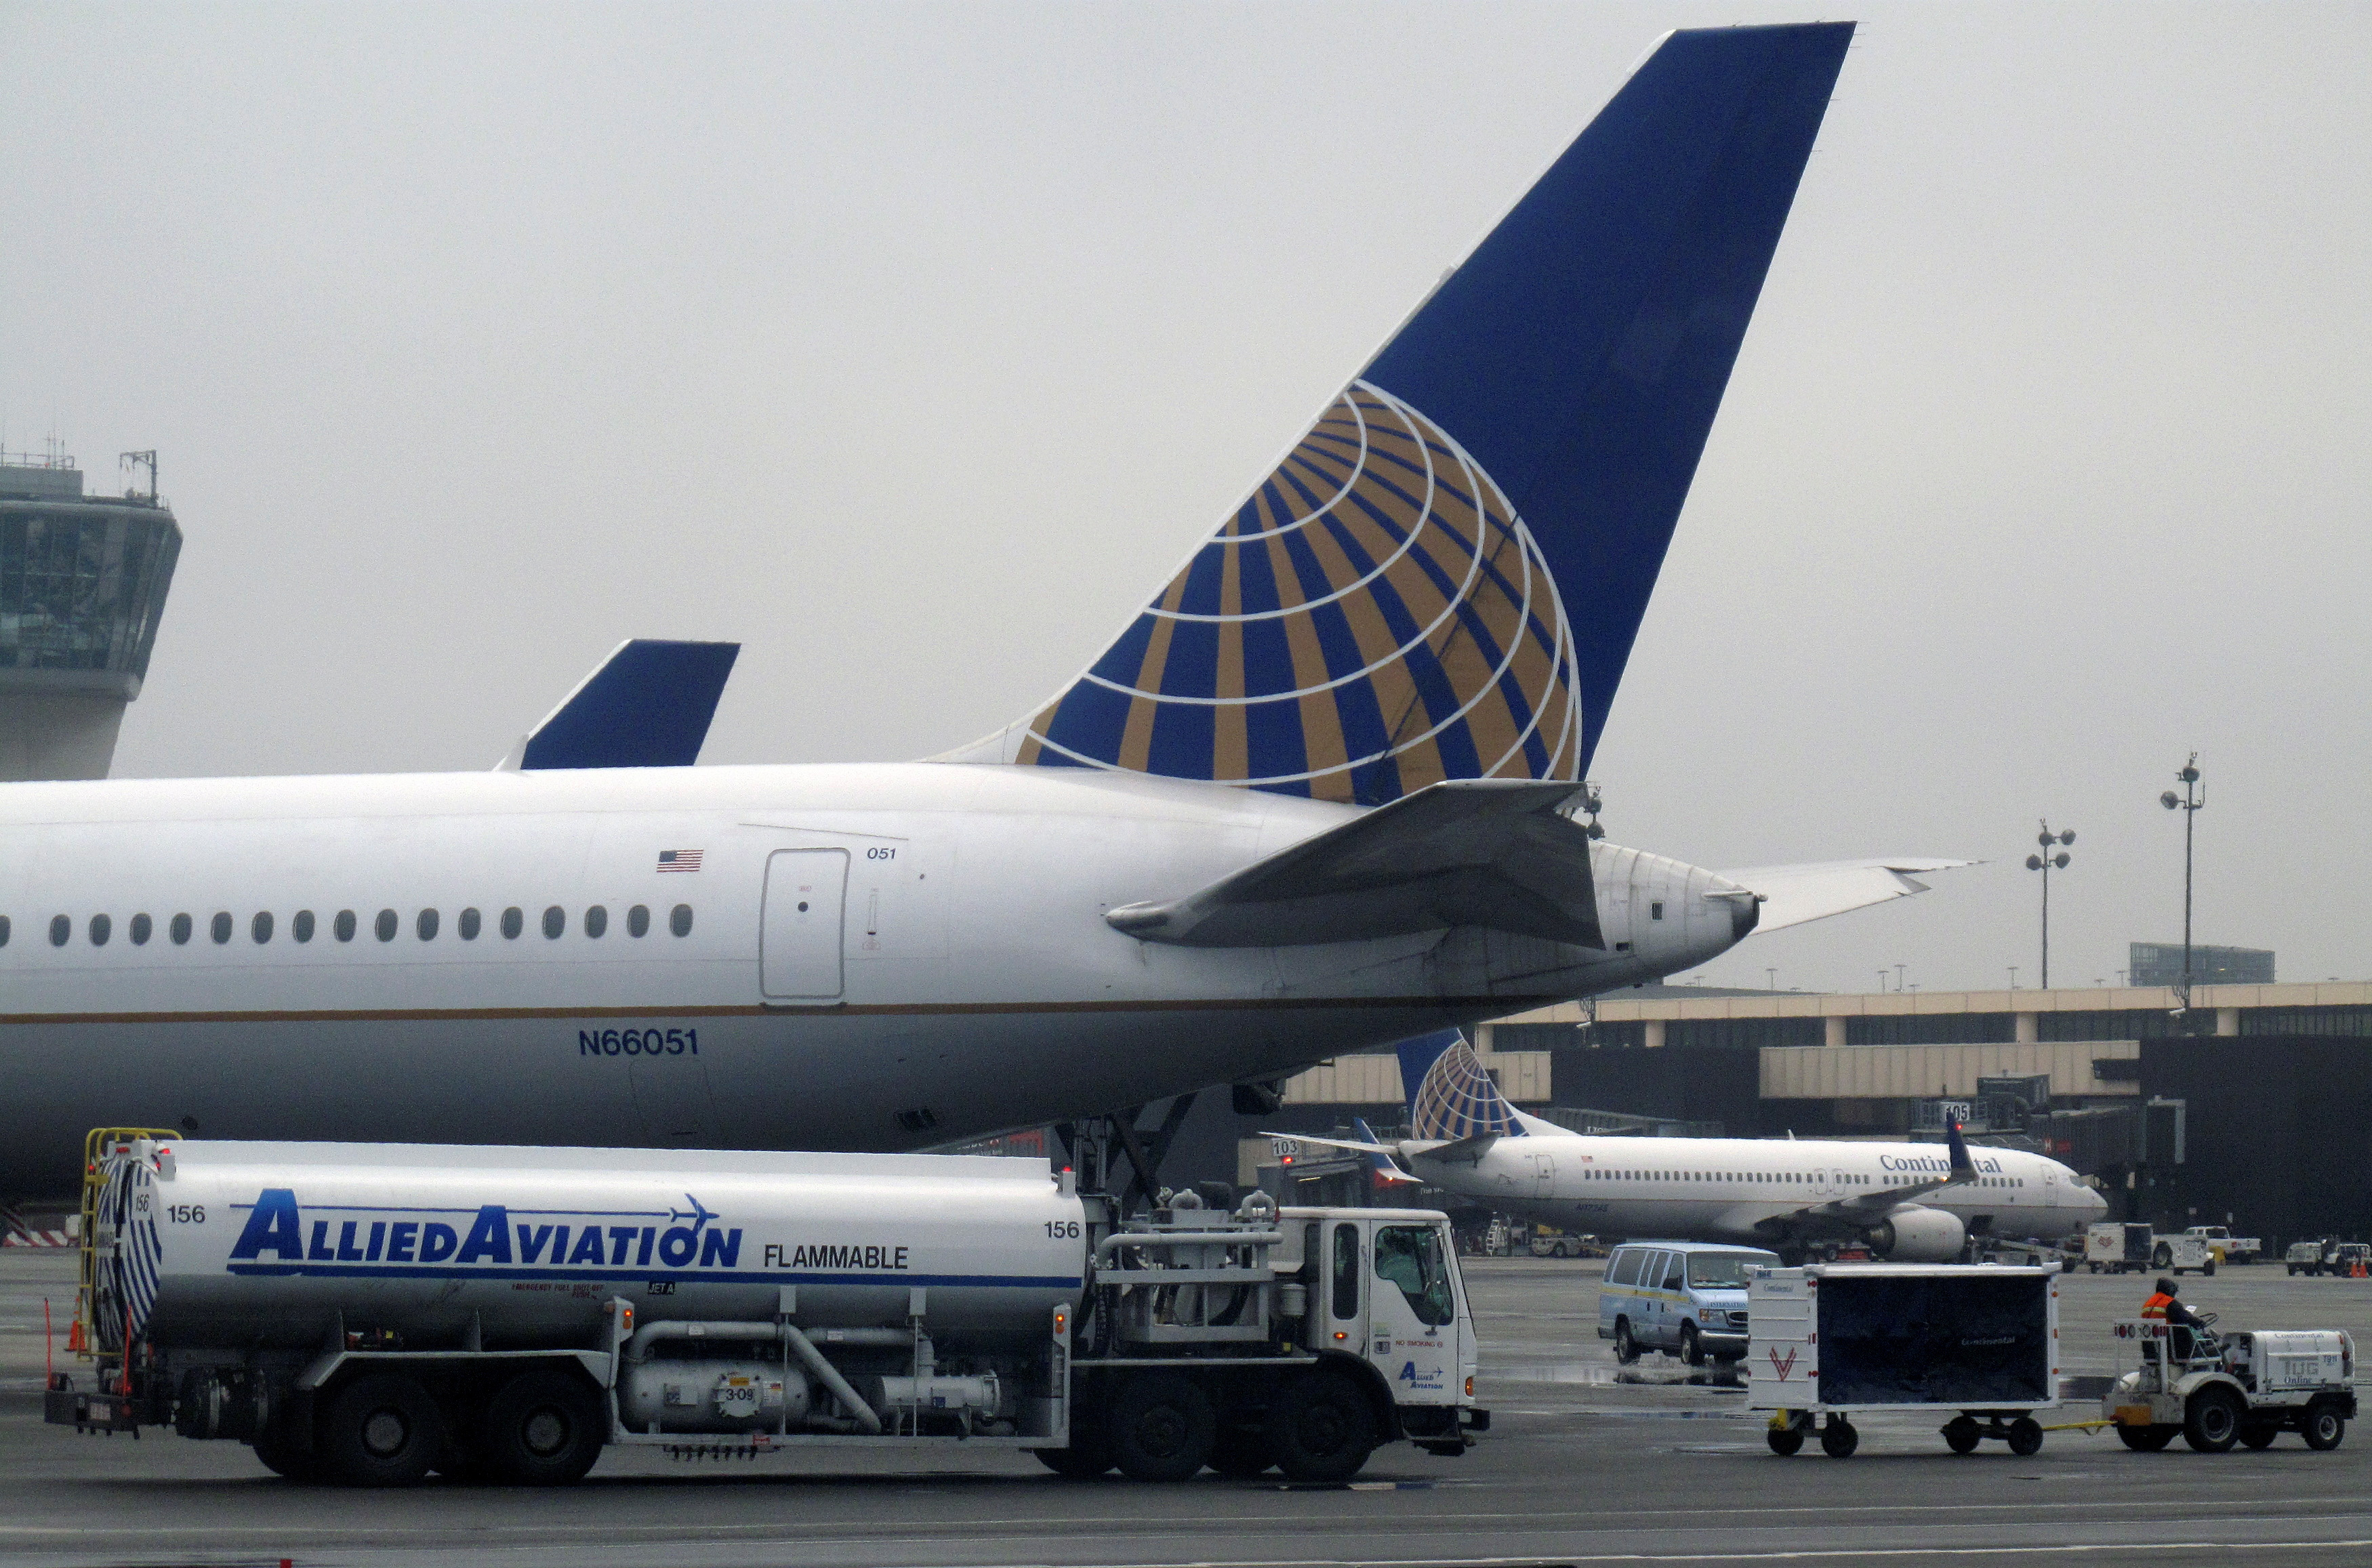 A Continental Airlines airplane is refueled at its gate at Newark Liberty International Airport in Newark, New Jersey